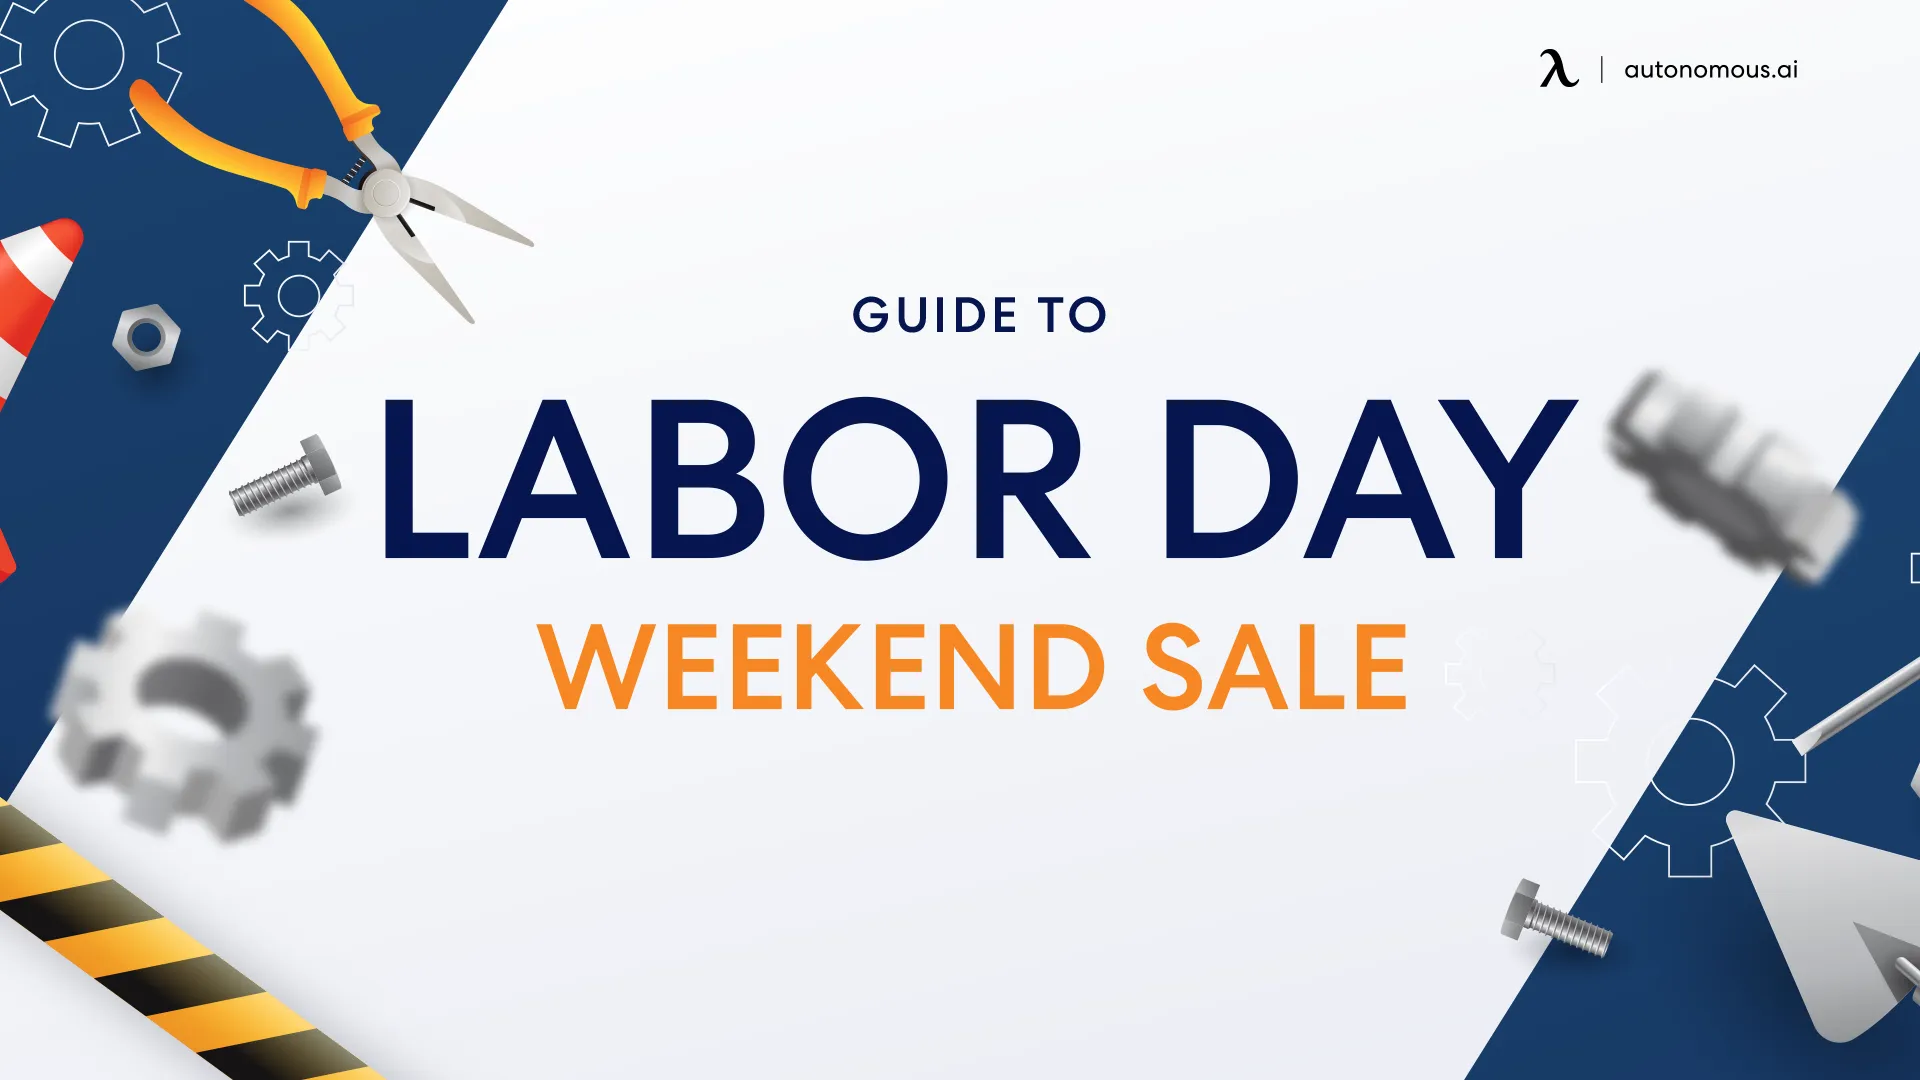 Labor Day Weekend Sale Guide: Where to Shop & What to Buy